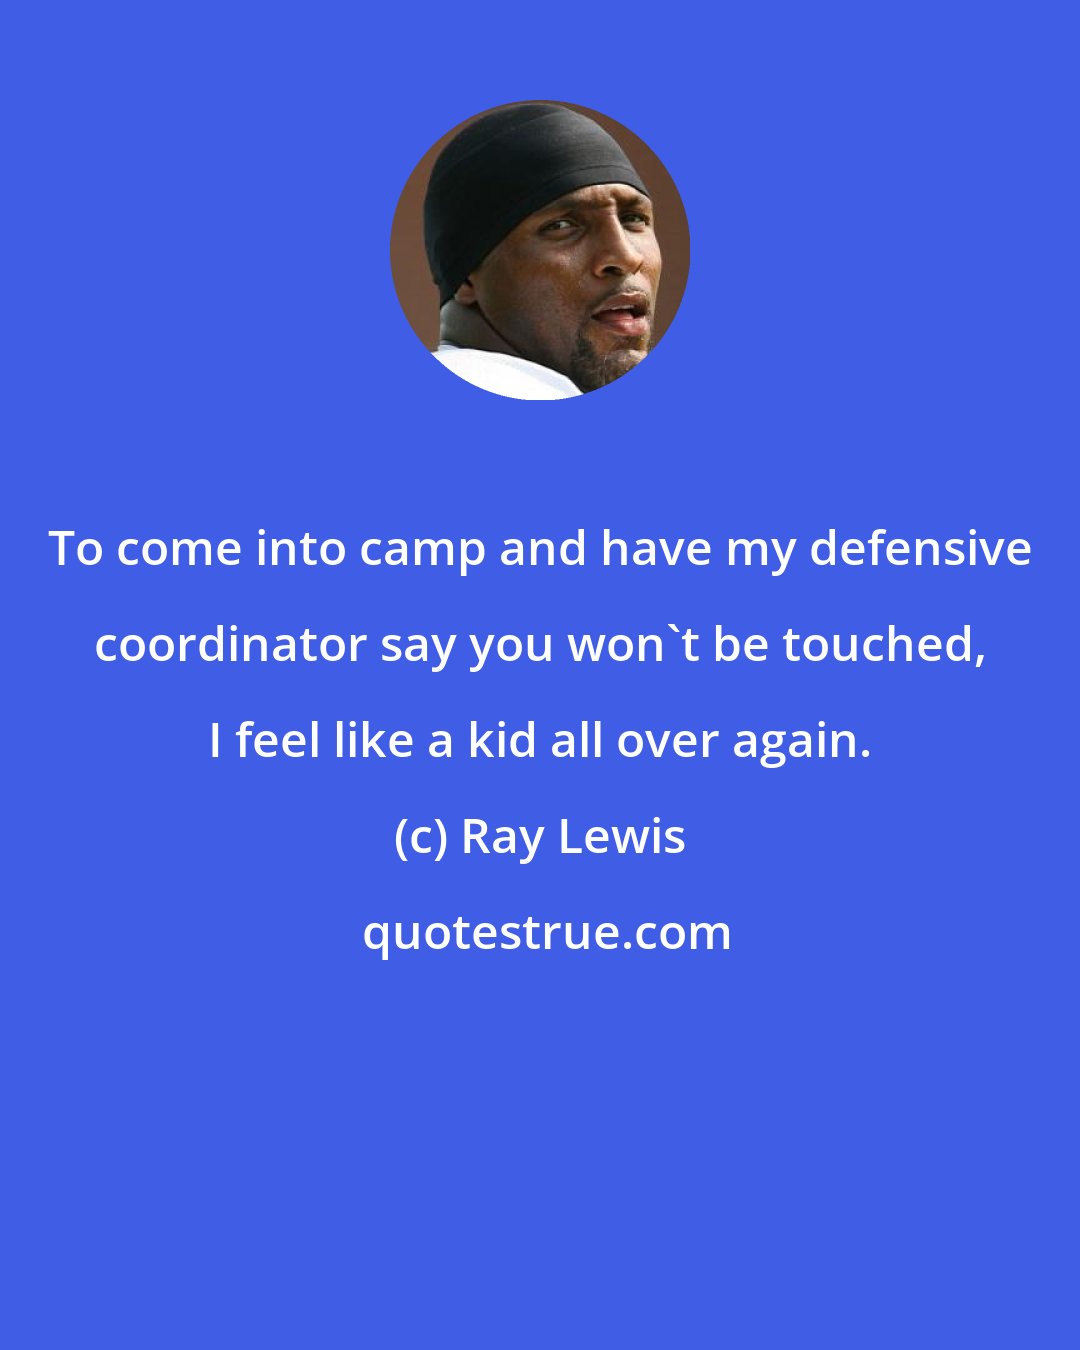 Ray Lewis: To come into camp and have my defensive coordinator say you won't be touched, I feel like a kid all over again.